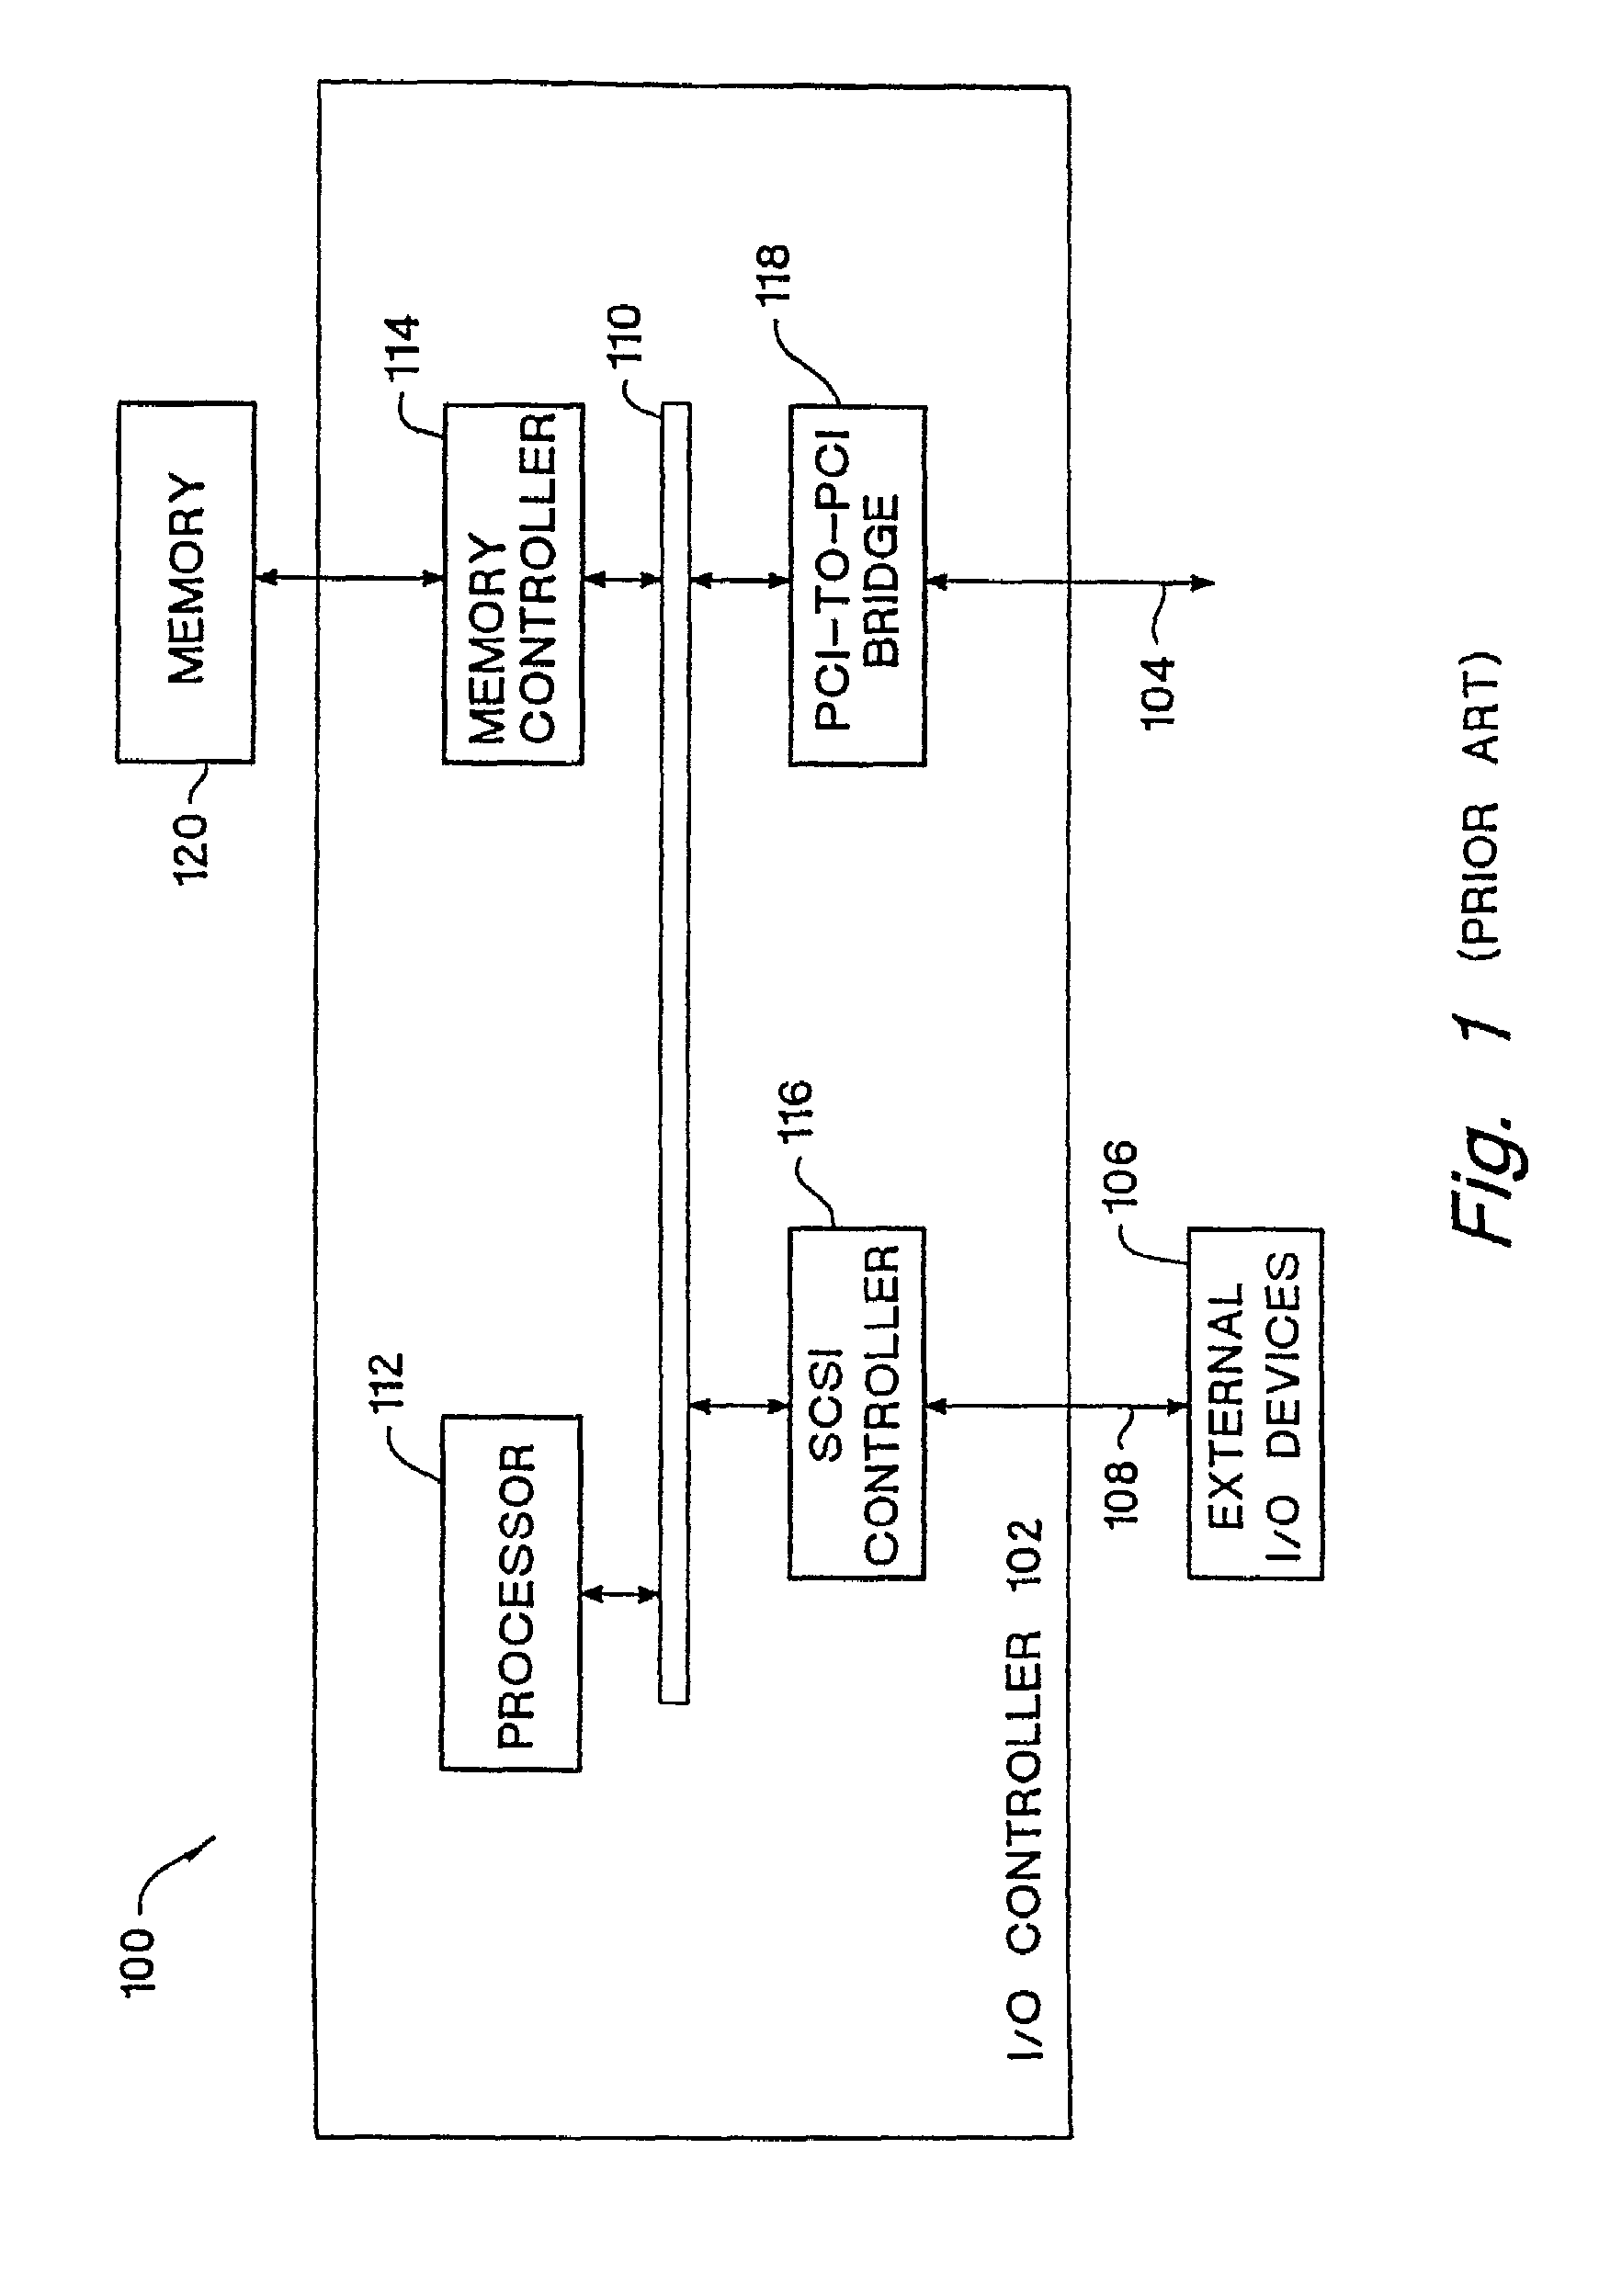 Memory controller supporting redundant synchronous memories